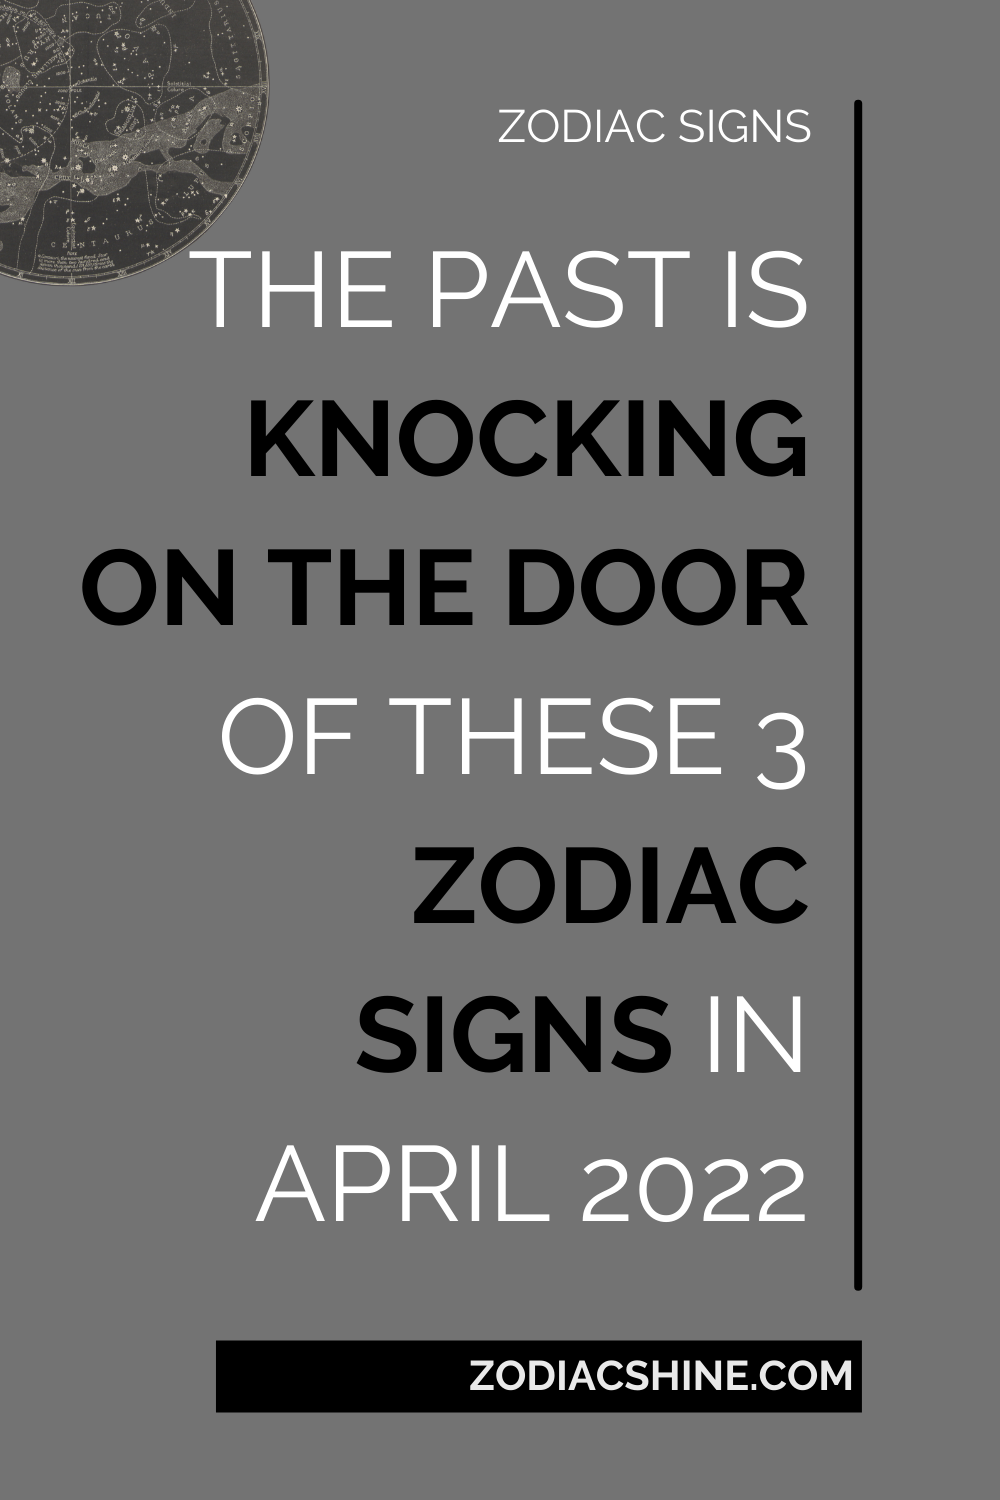 The Past Is Knocking On The Door Of These 3 Zodiac Signs In April 2022